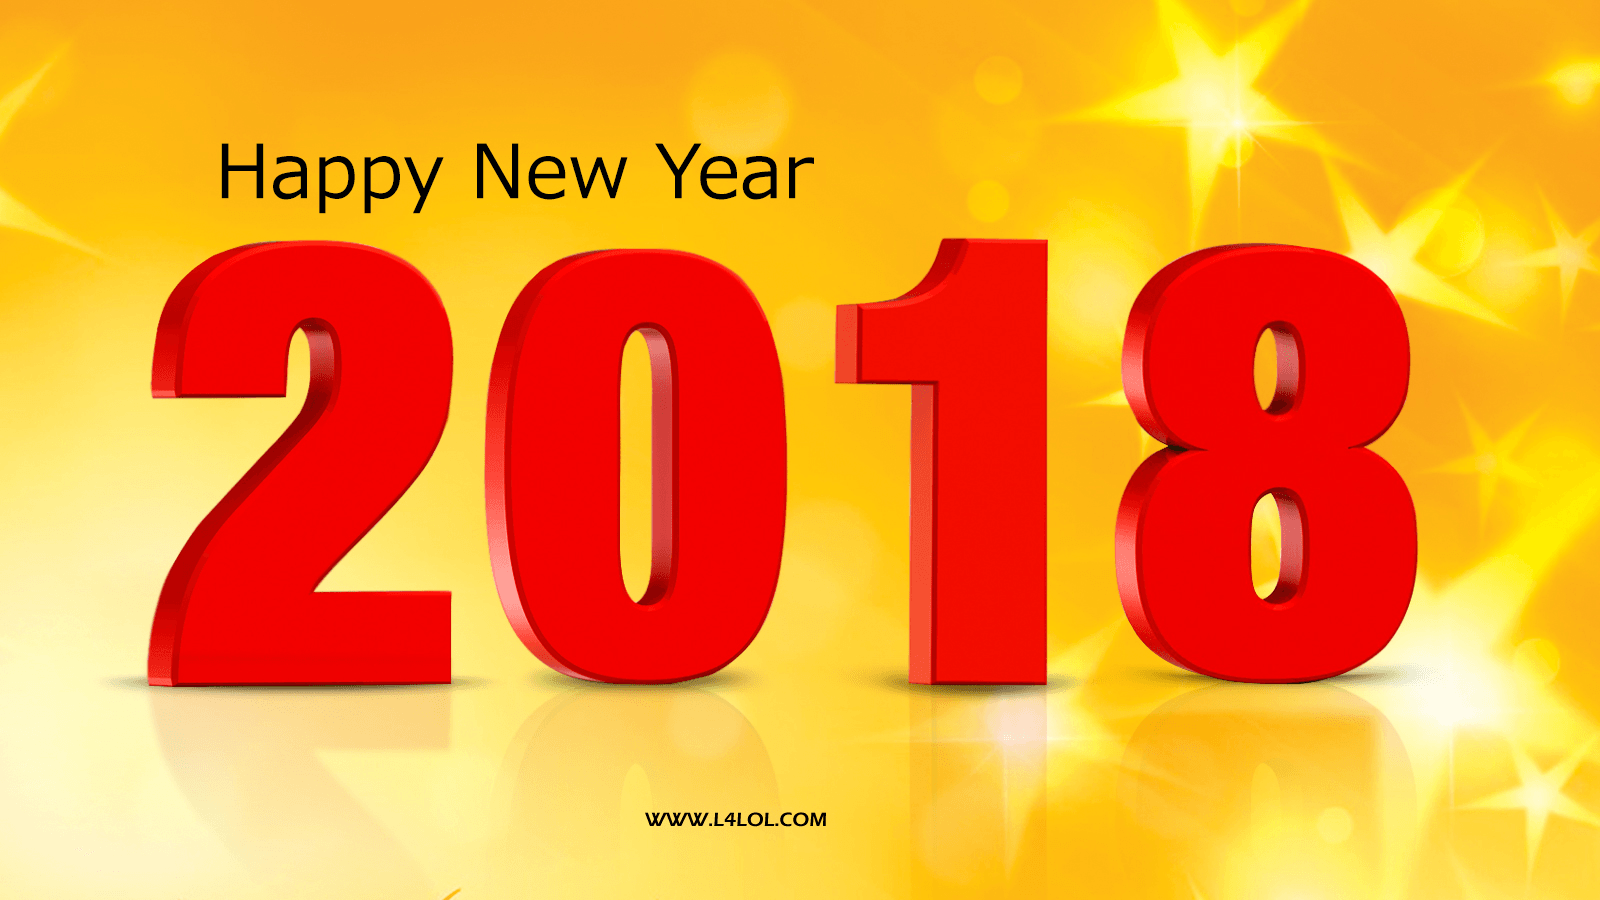 Free Download*}Happy New Year 2018 Top Picture Image Photo HD